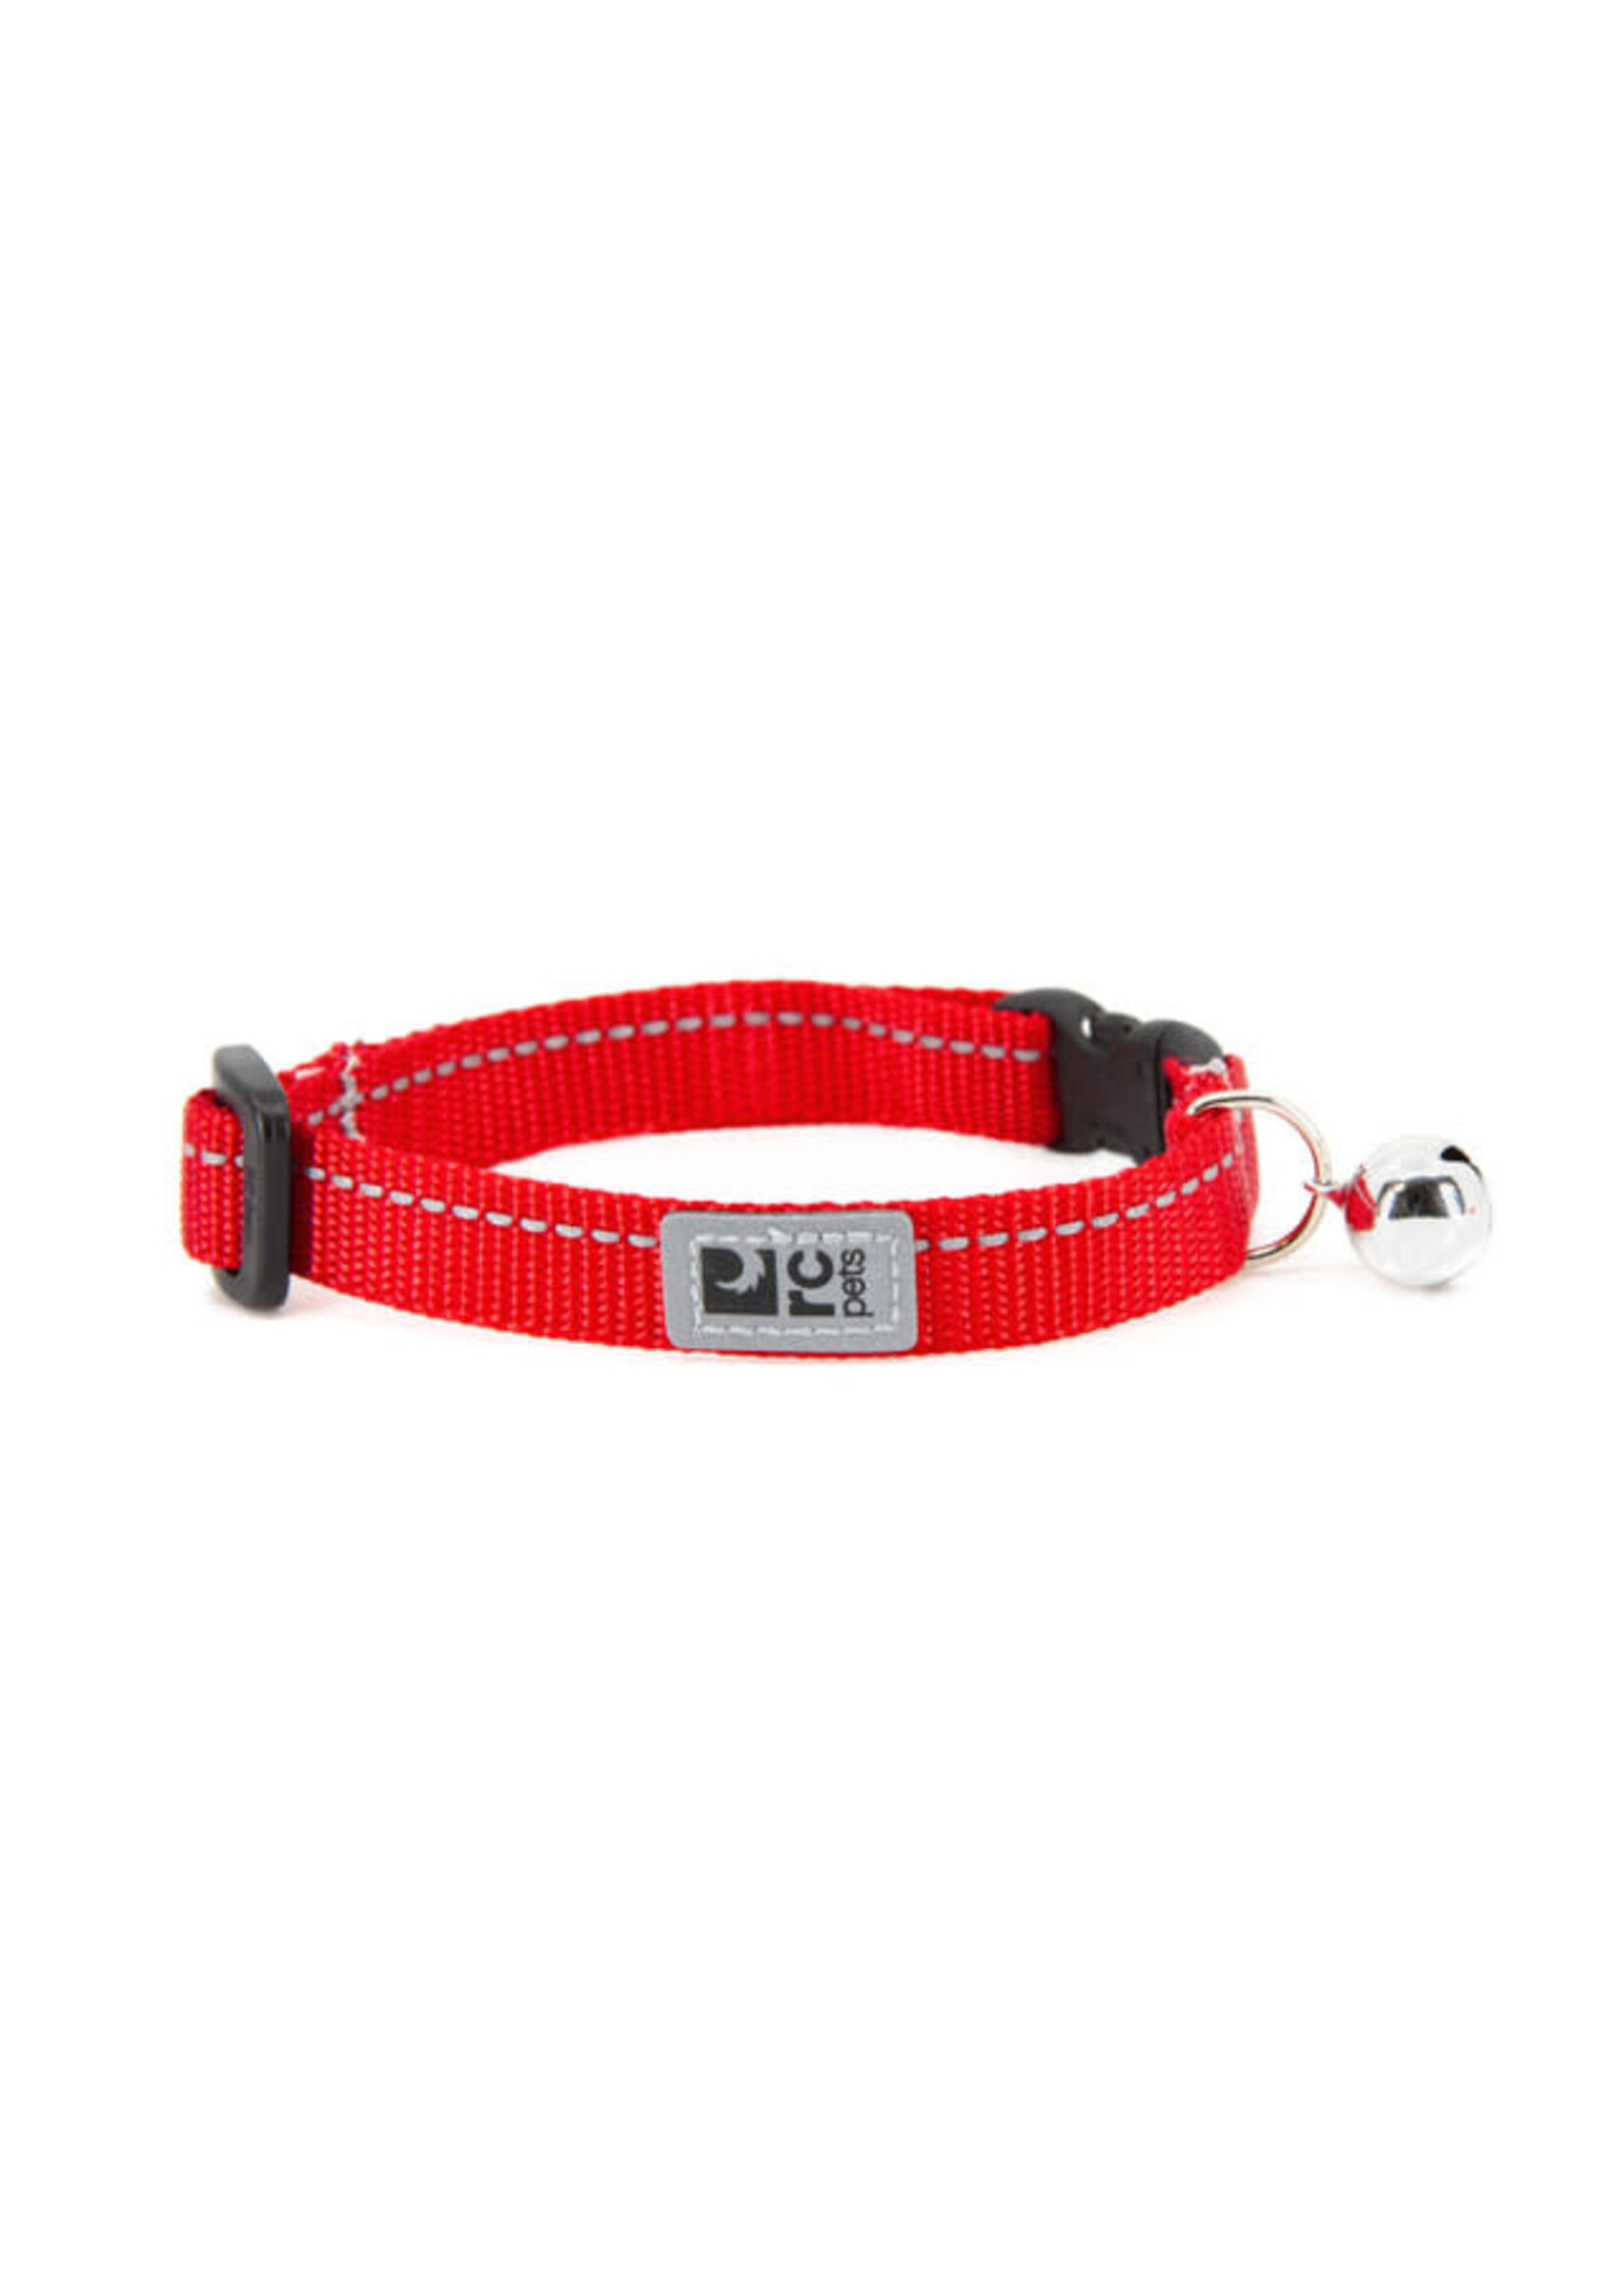 RC Pets Products RC Pets - Kitty Breakaway Collar Primary Red